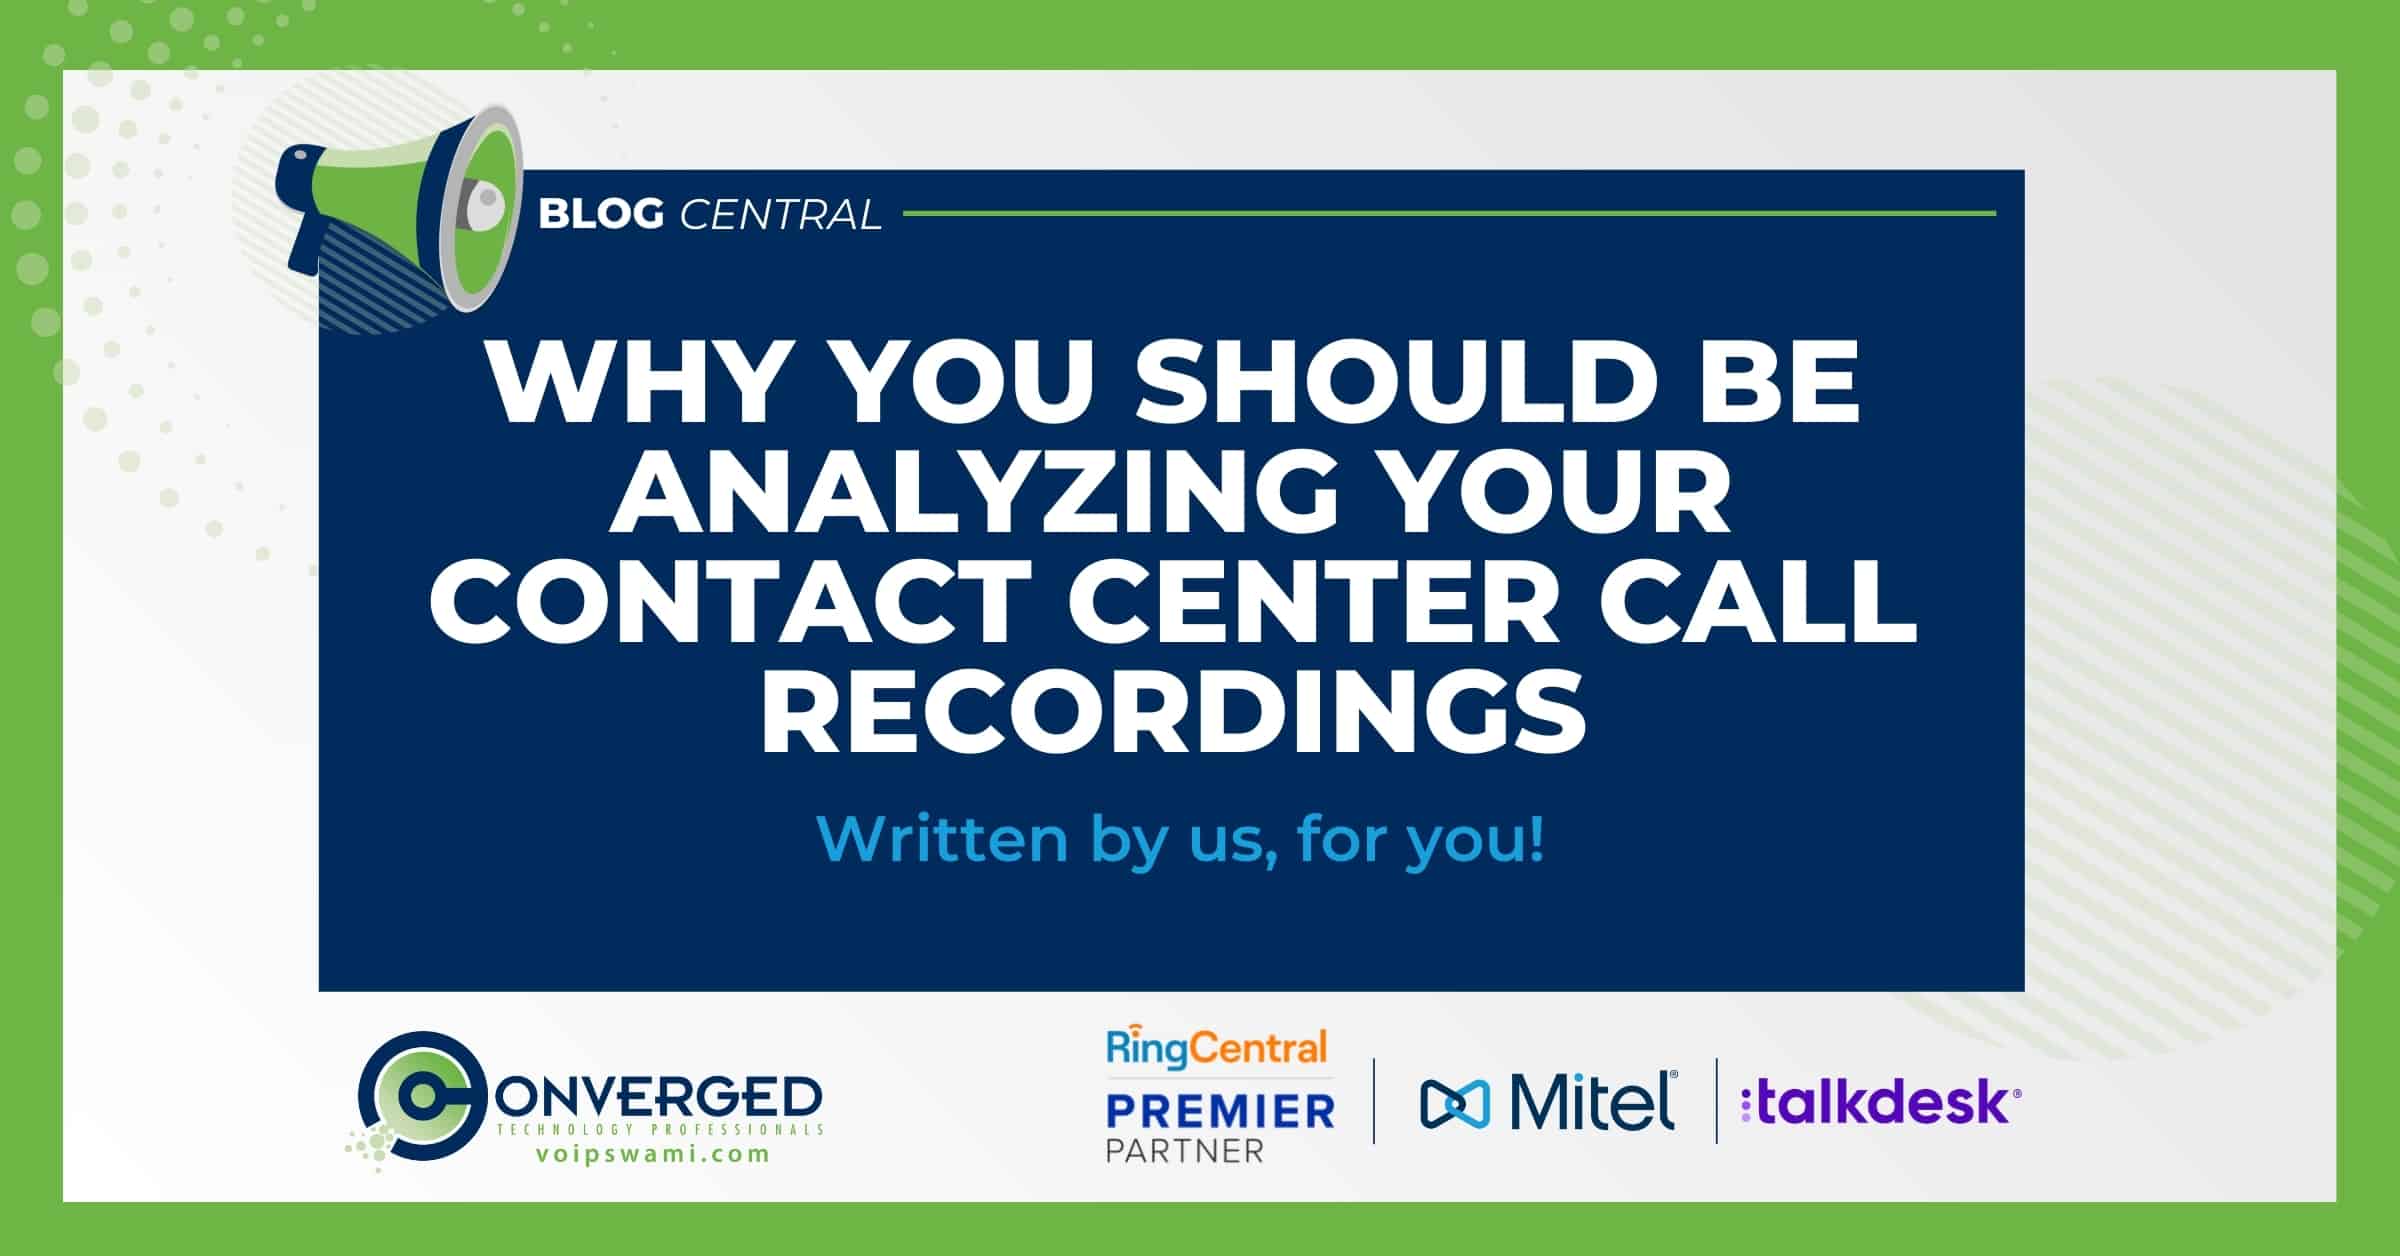 Why You Should Be Analyzing Your Contact Center Call Recordings